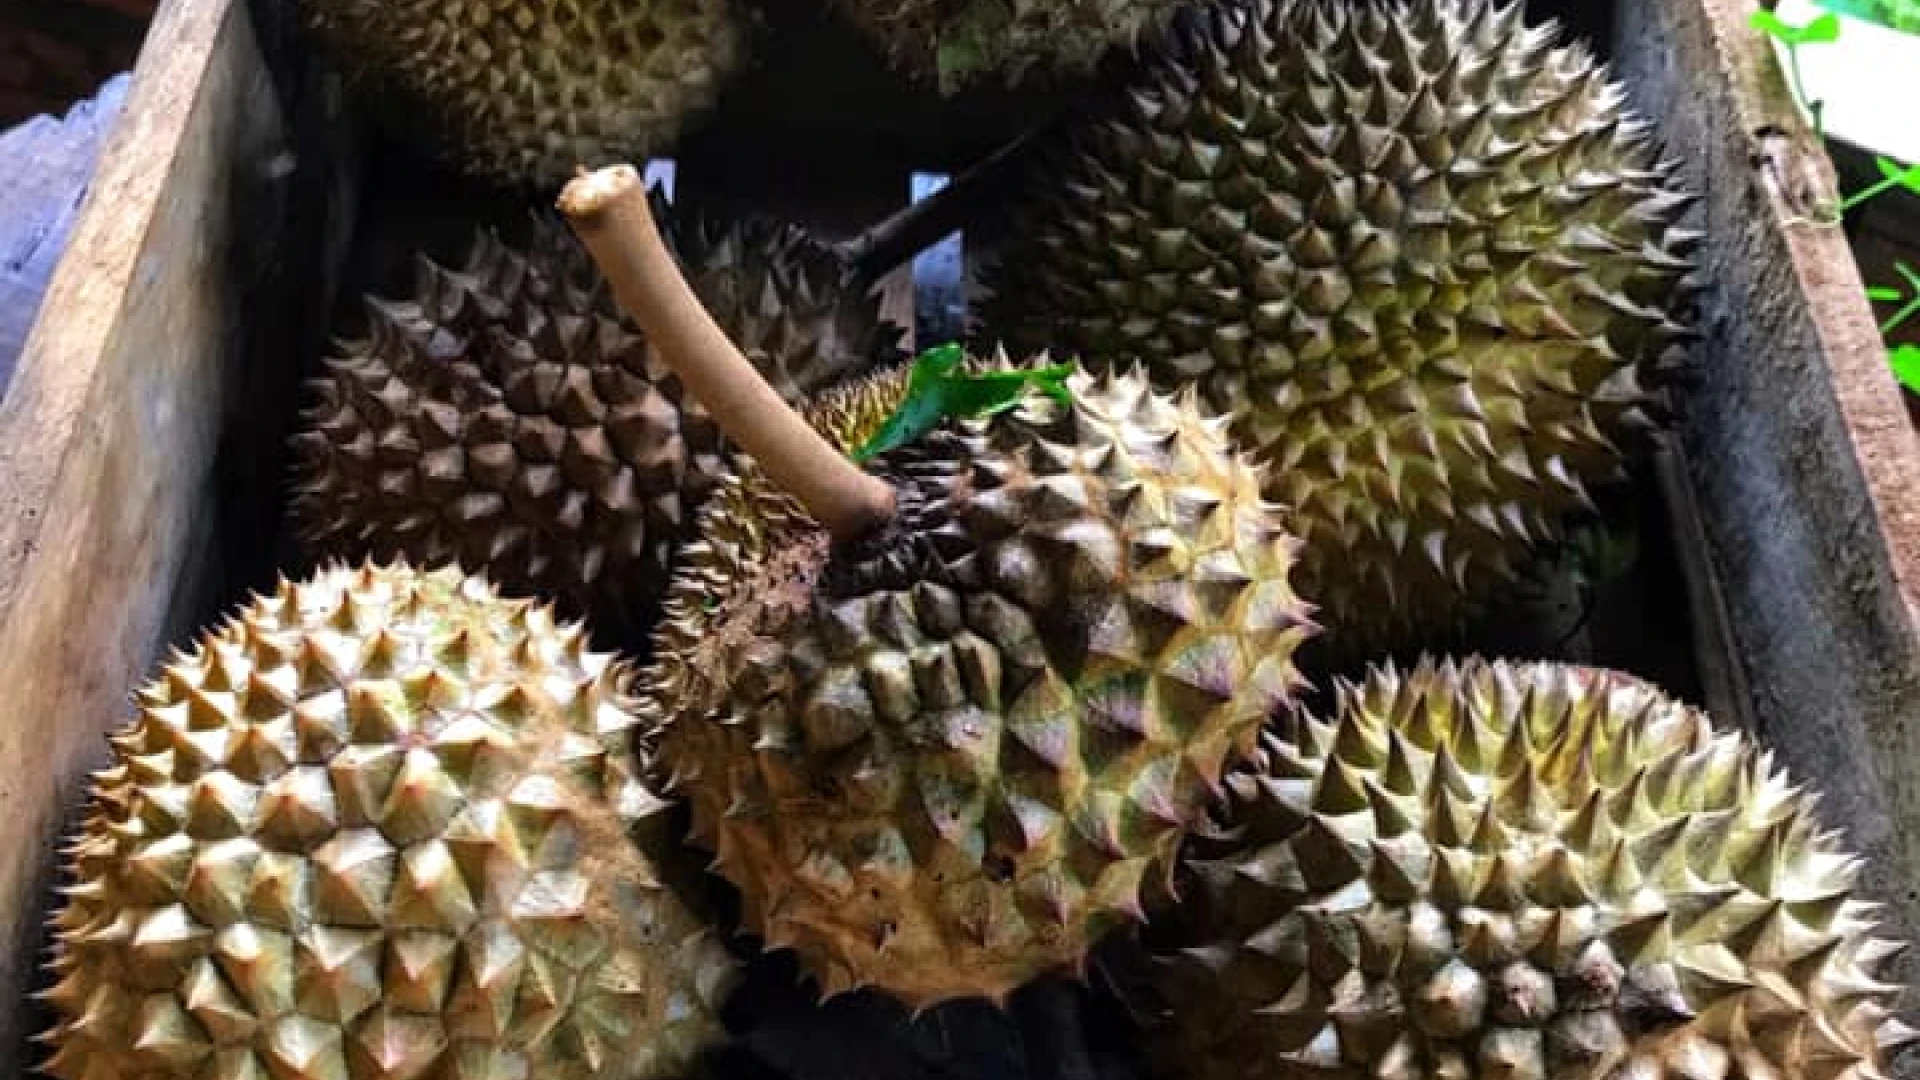 Paksong Durian